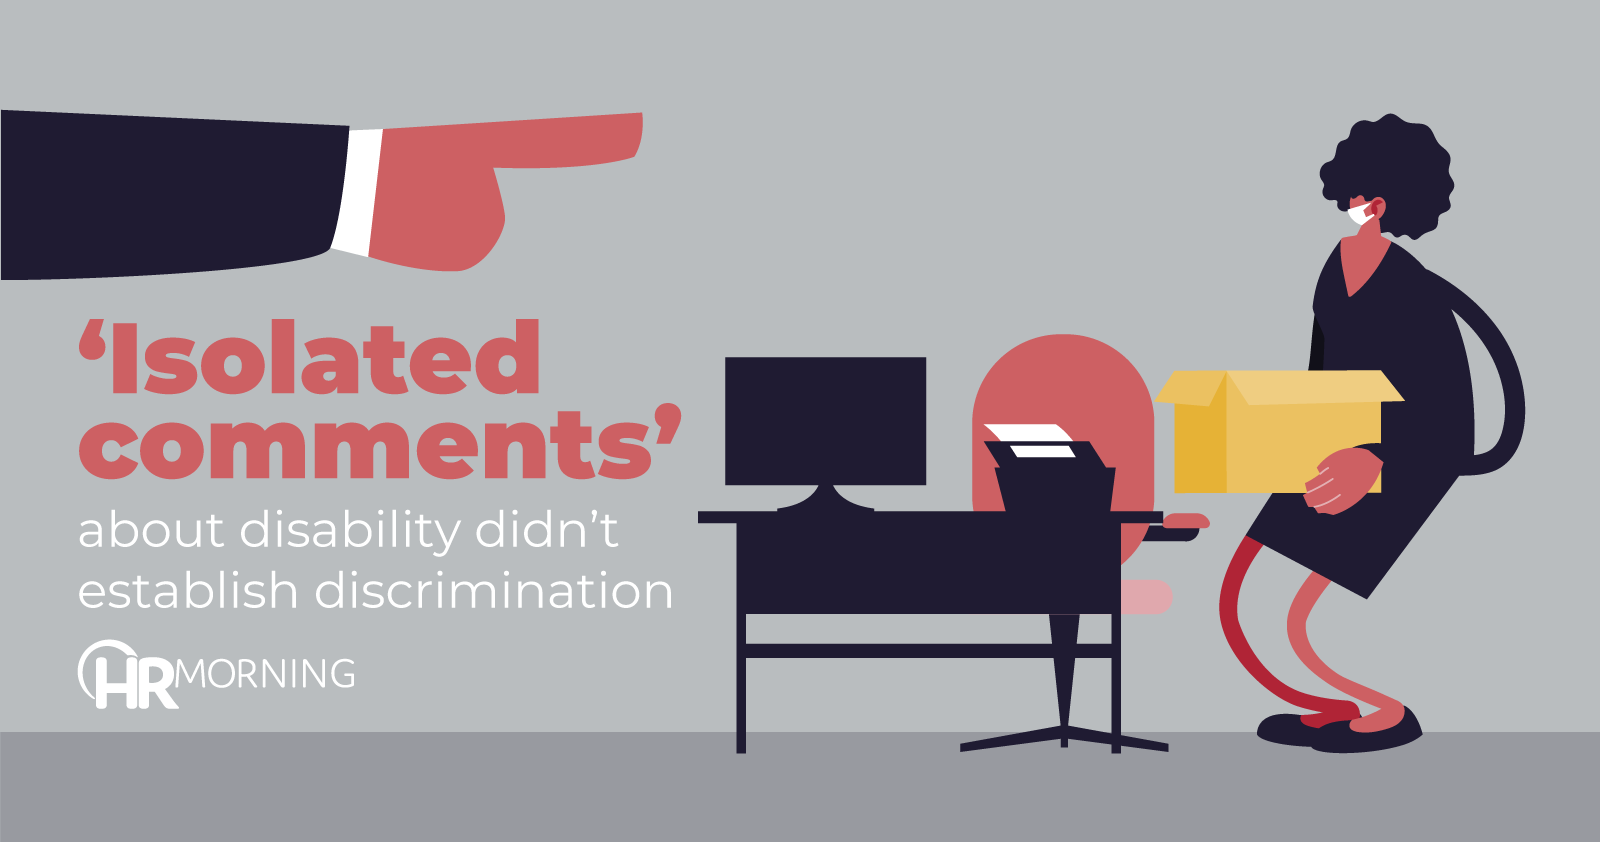 Isolated comments about disability didn't establish discrimination